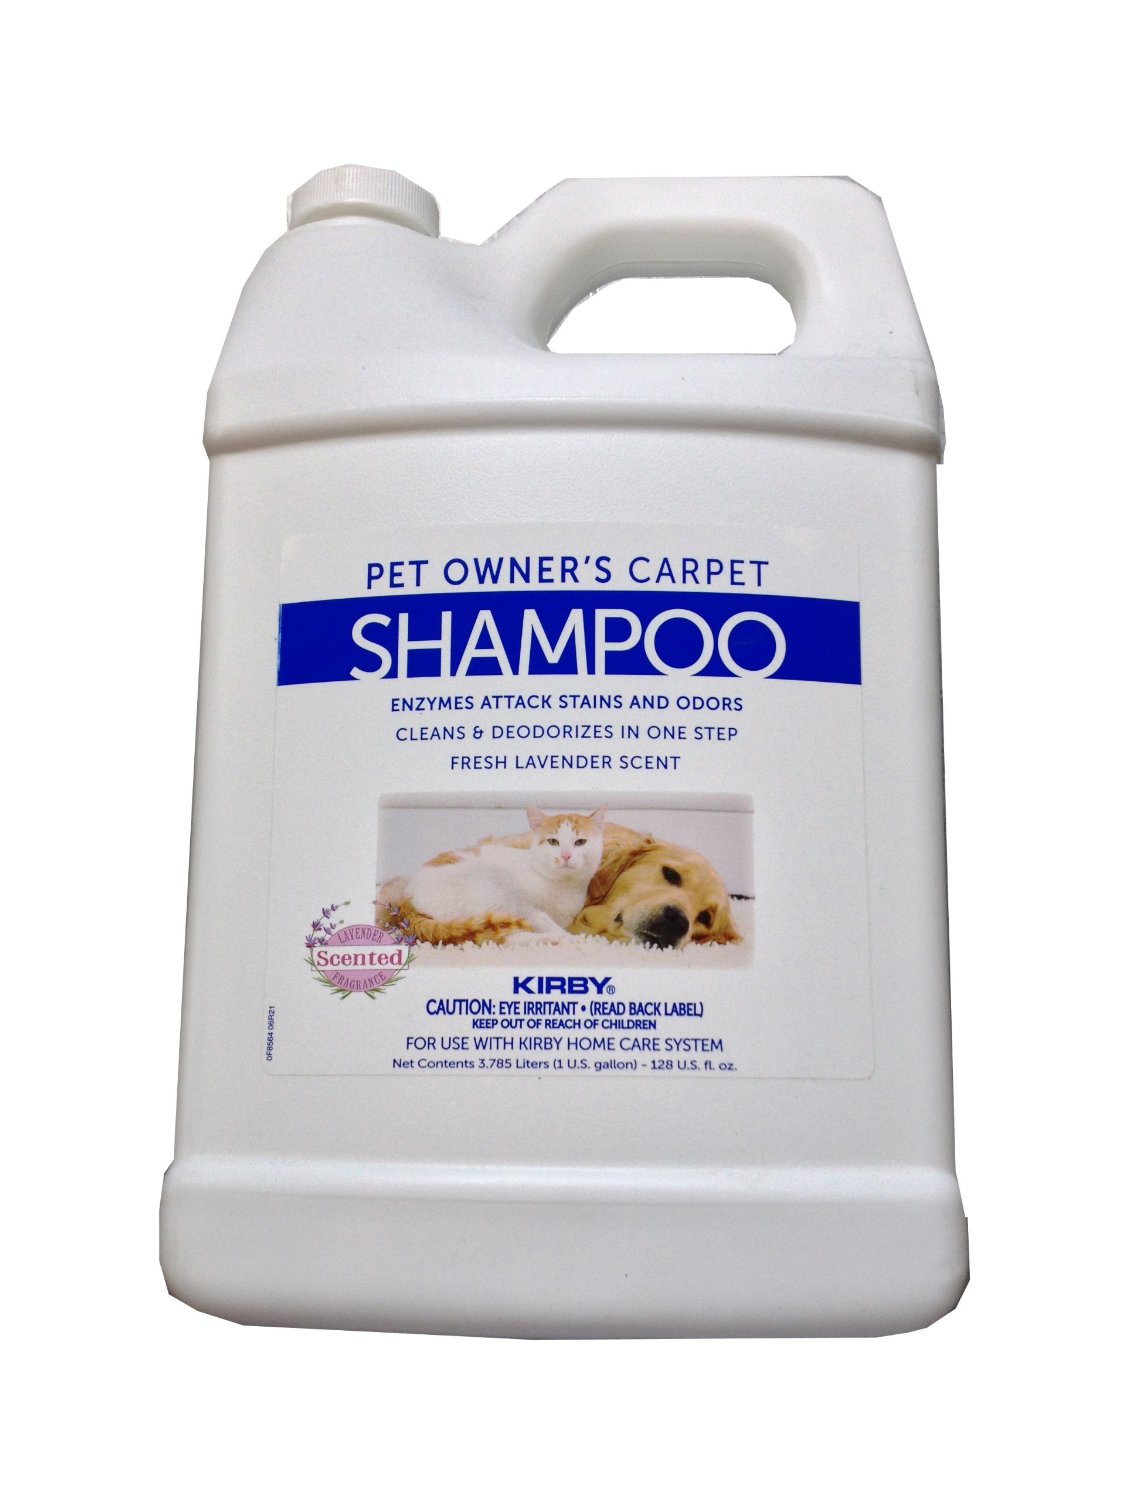 Kirby carpet shampoo for pet owners